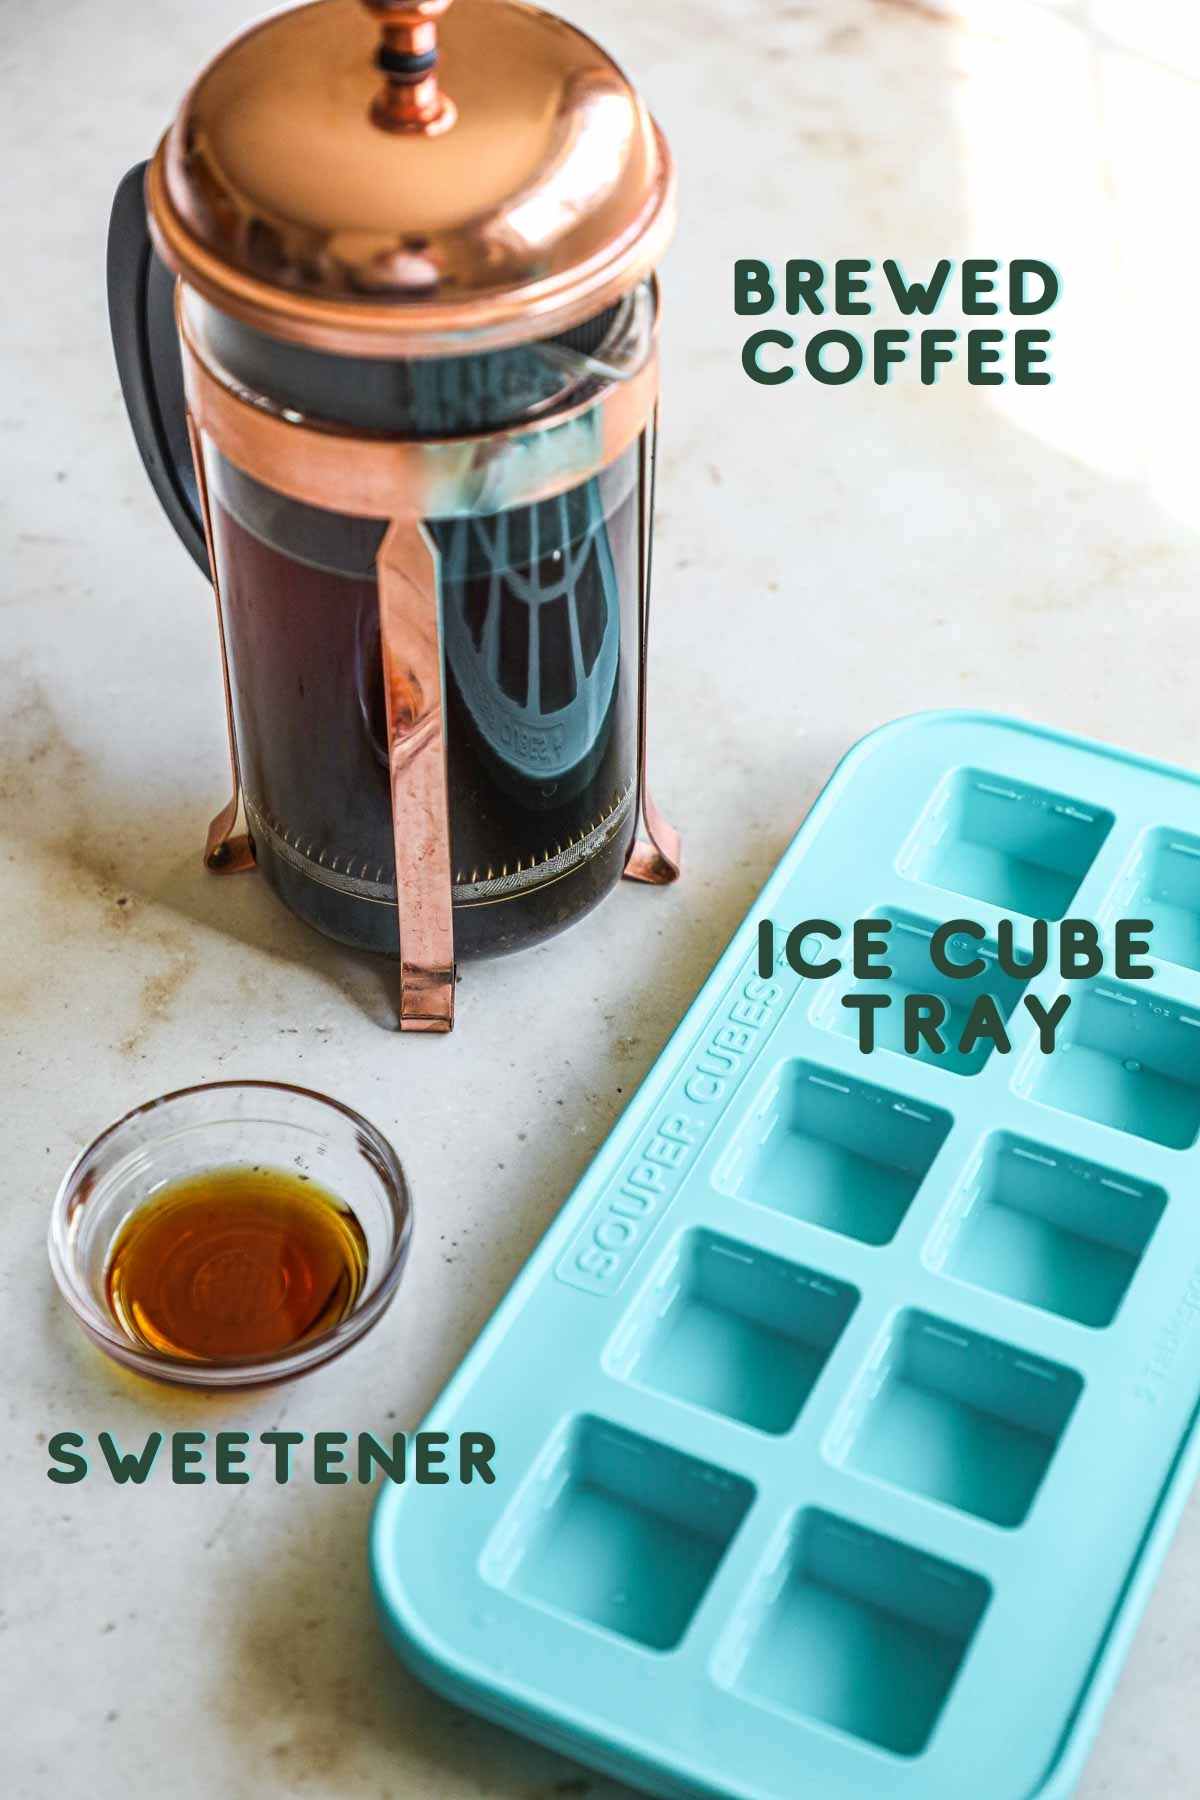 Ingredients to make coffee ice cubes, including brewed coffee, sweetener, and an ice cube tray.